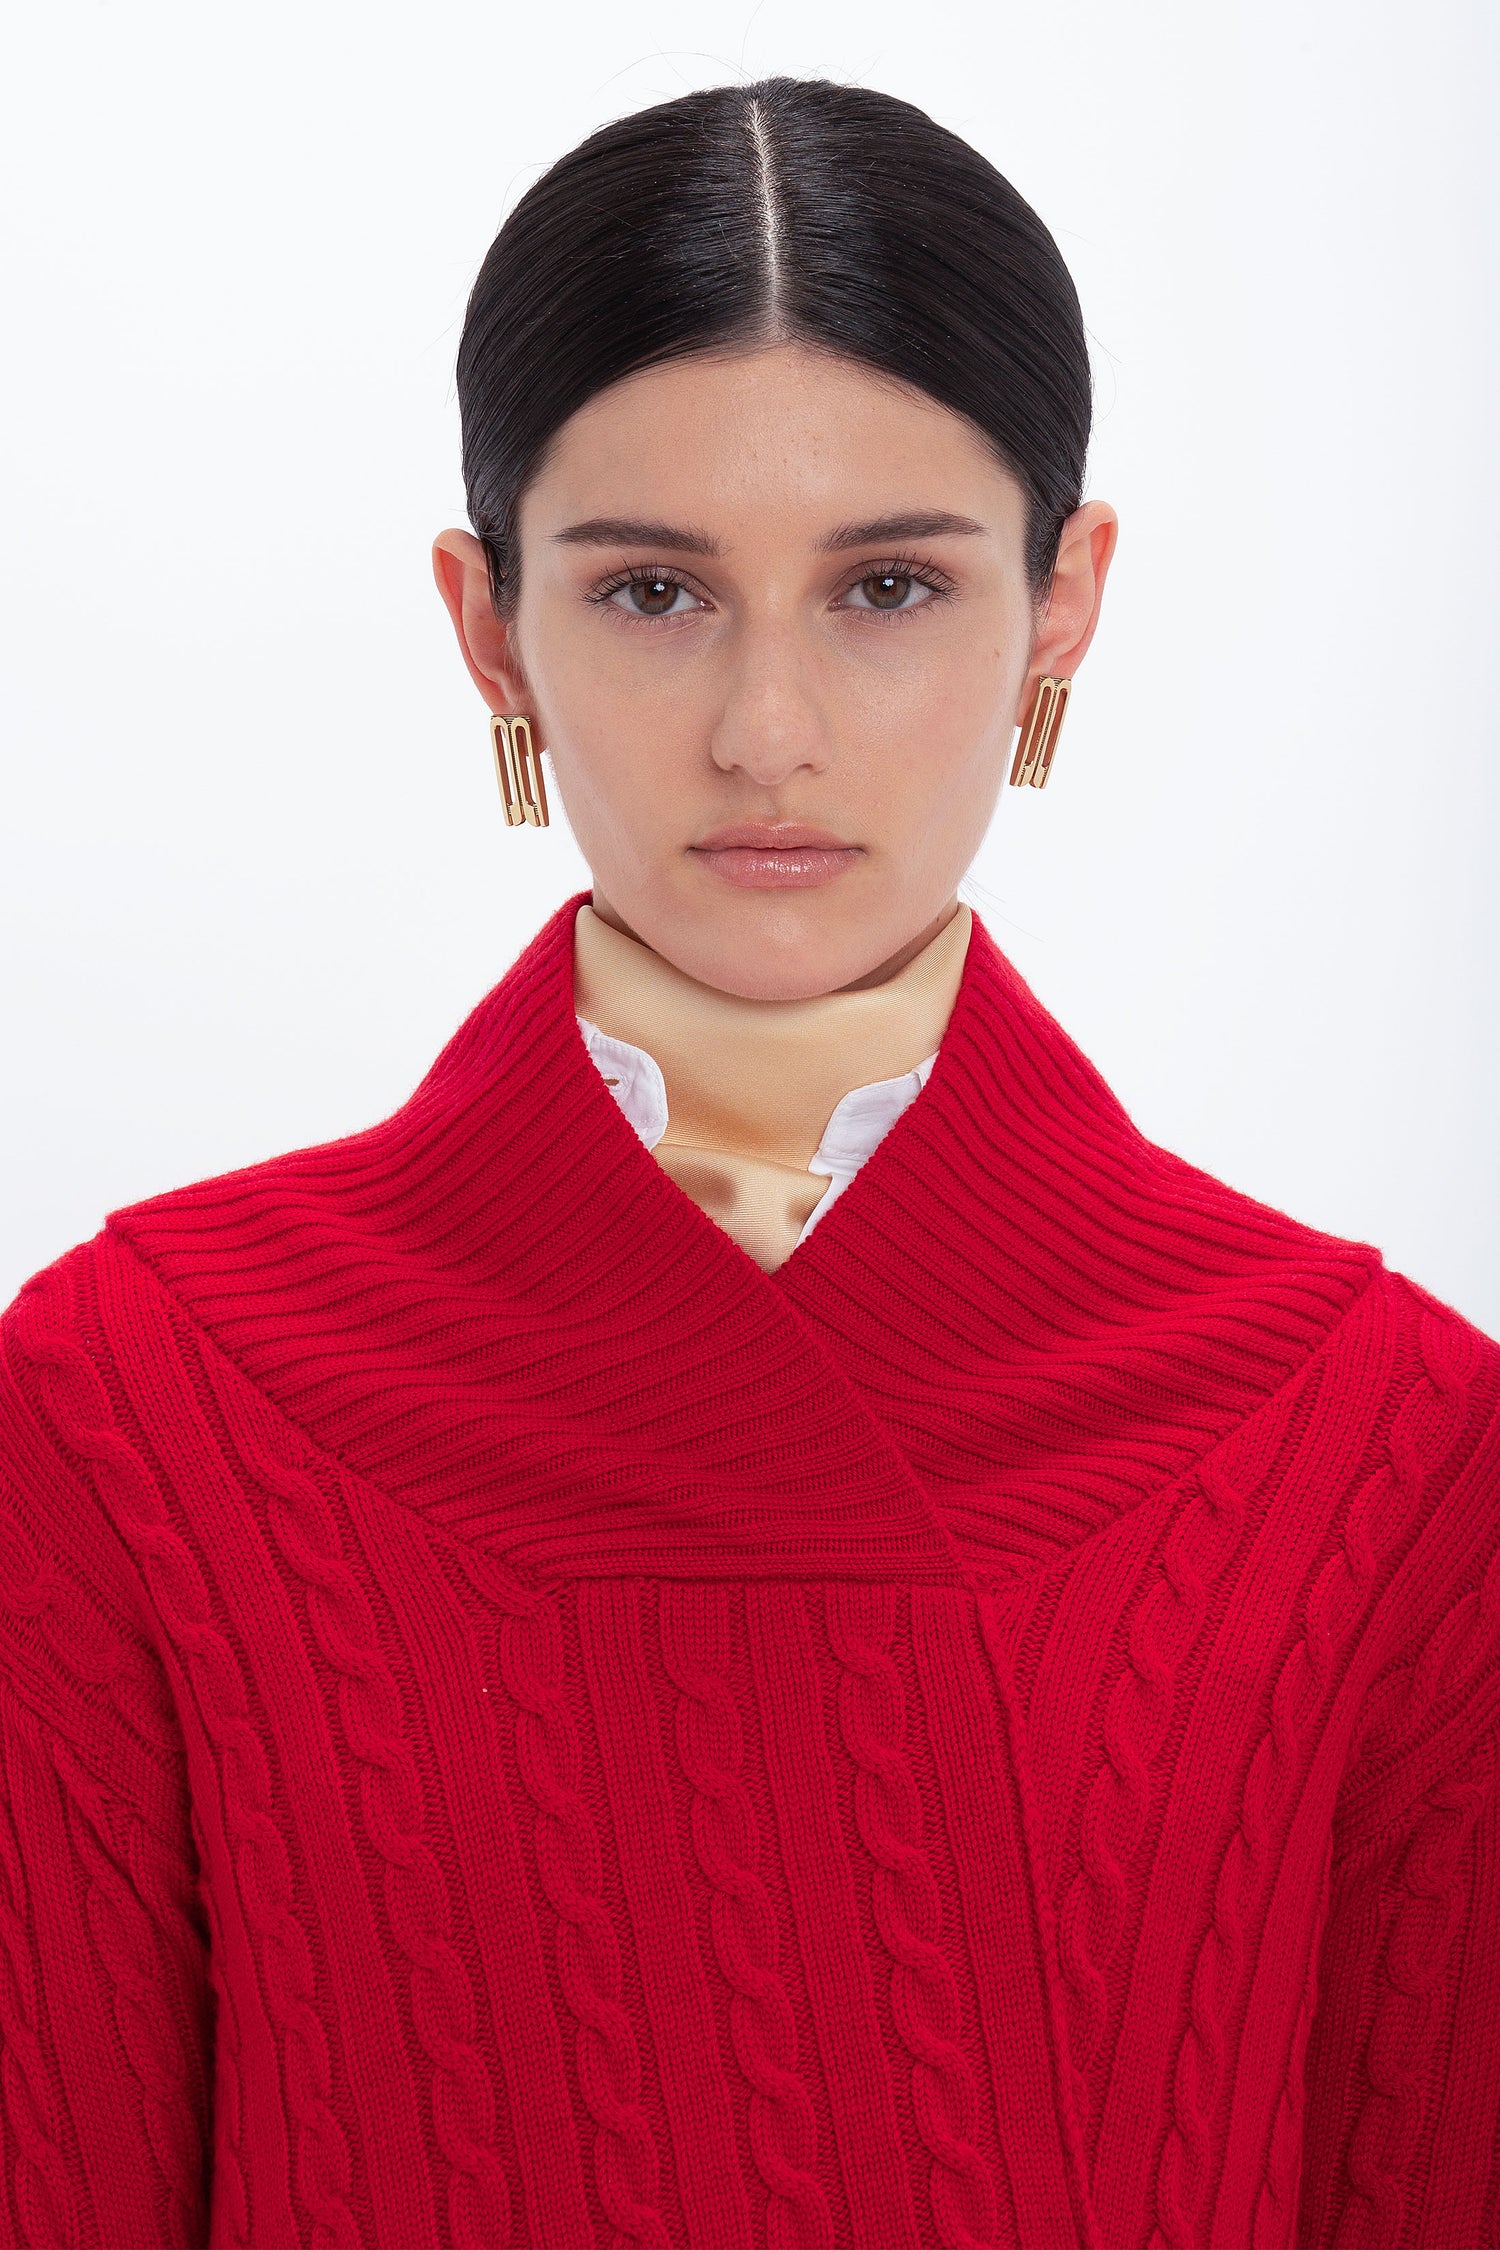 A person with straight dark hair pulled back, wearing gold earrings and a luxurious red, Victoria Beckham Wrap Detail Jumper In Red with a high collar, stands against a plain white background.